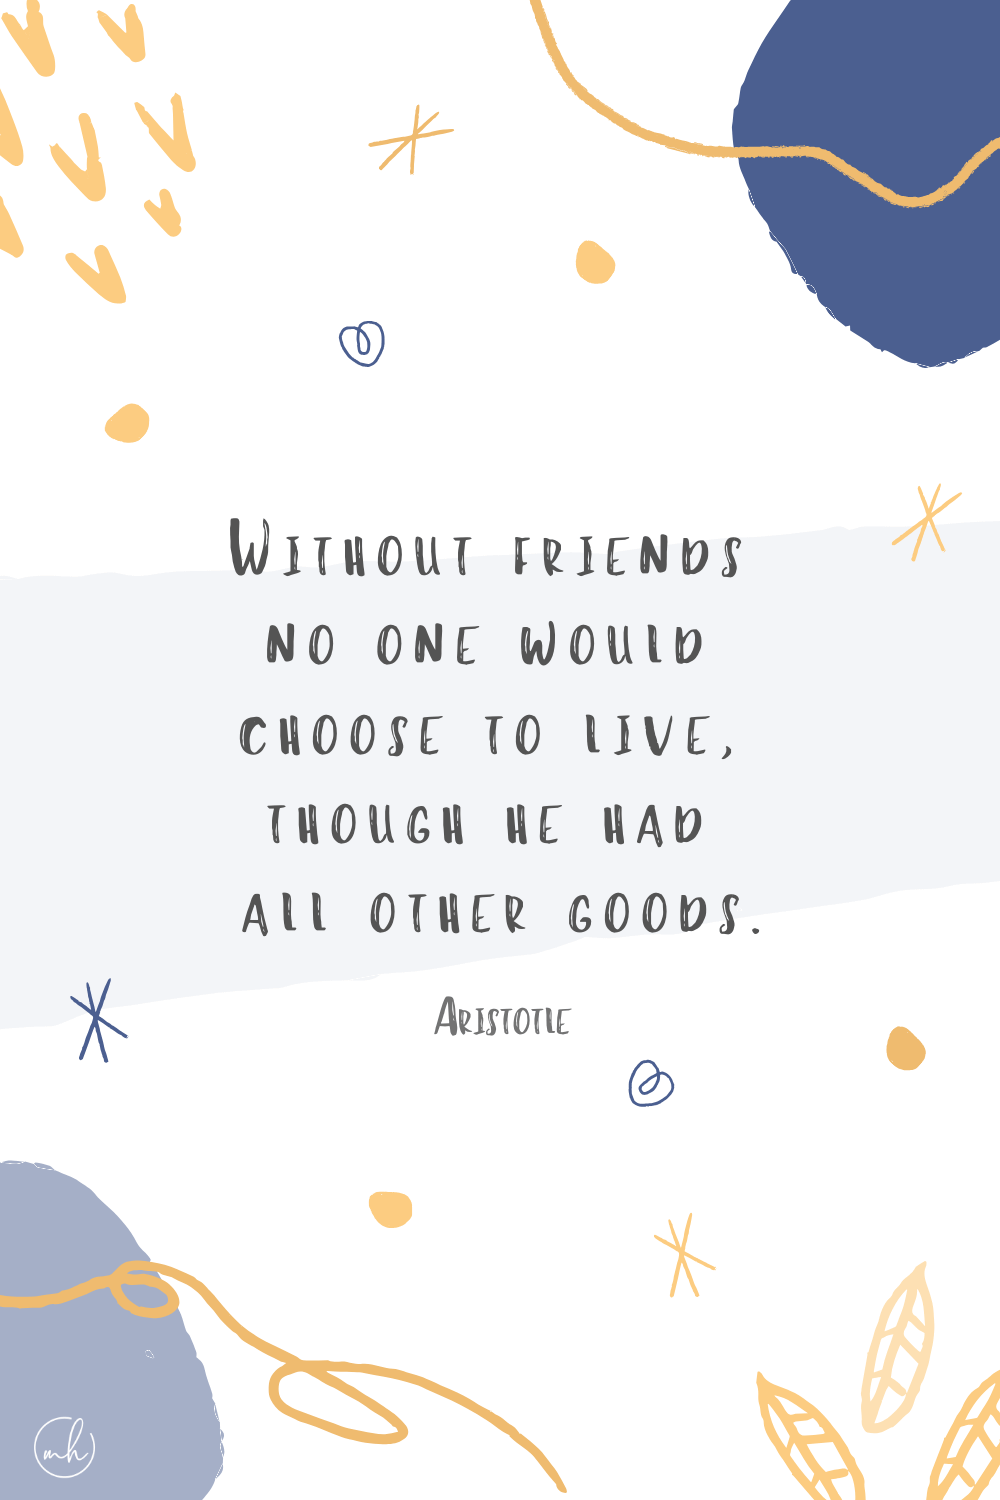 “Without friends no one would choose to live, though he had all other goods.” - Aristotle